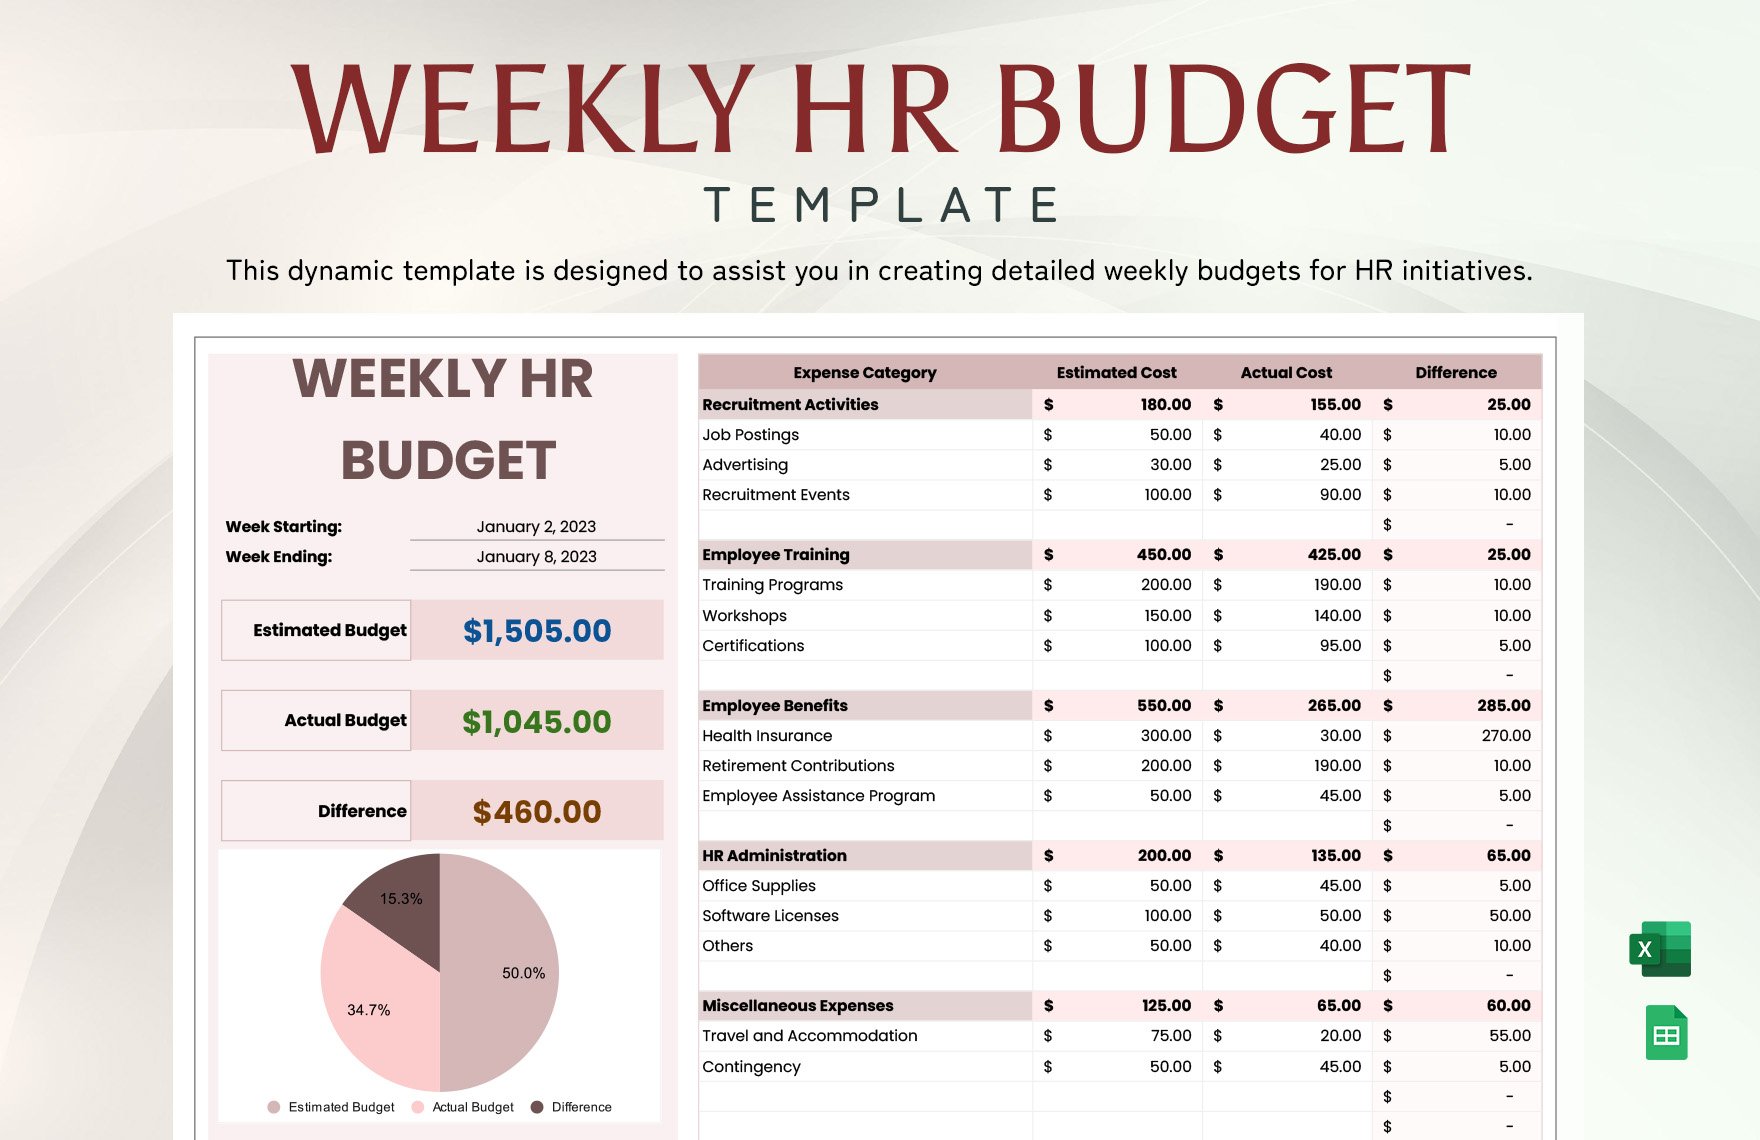 Weekly HR Budget Template